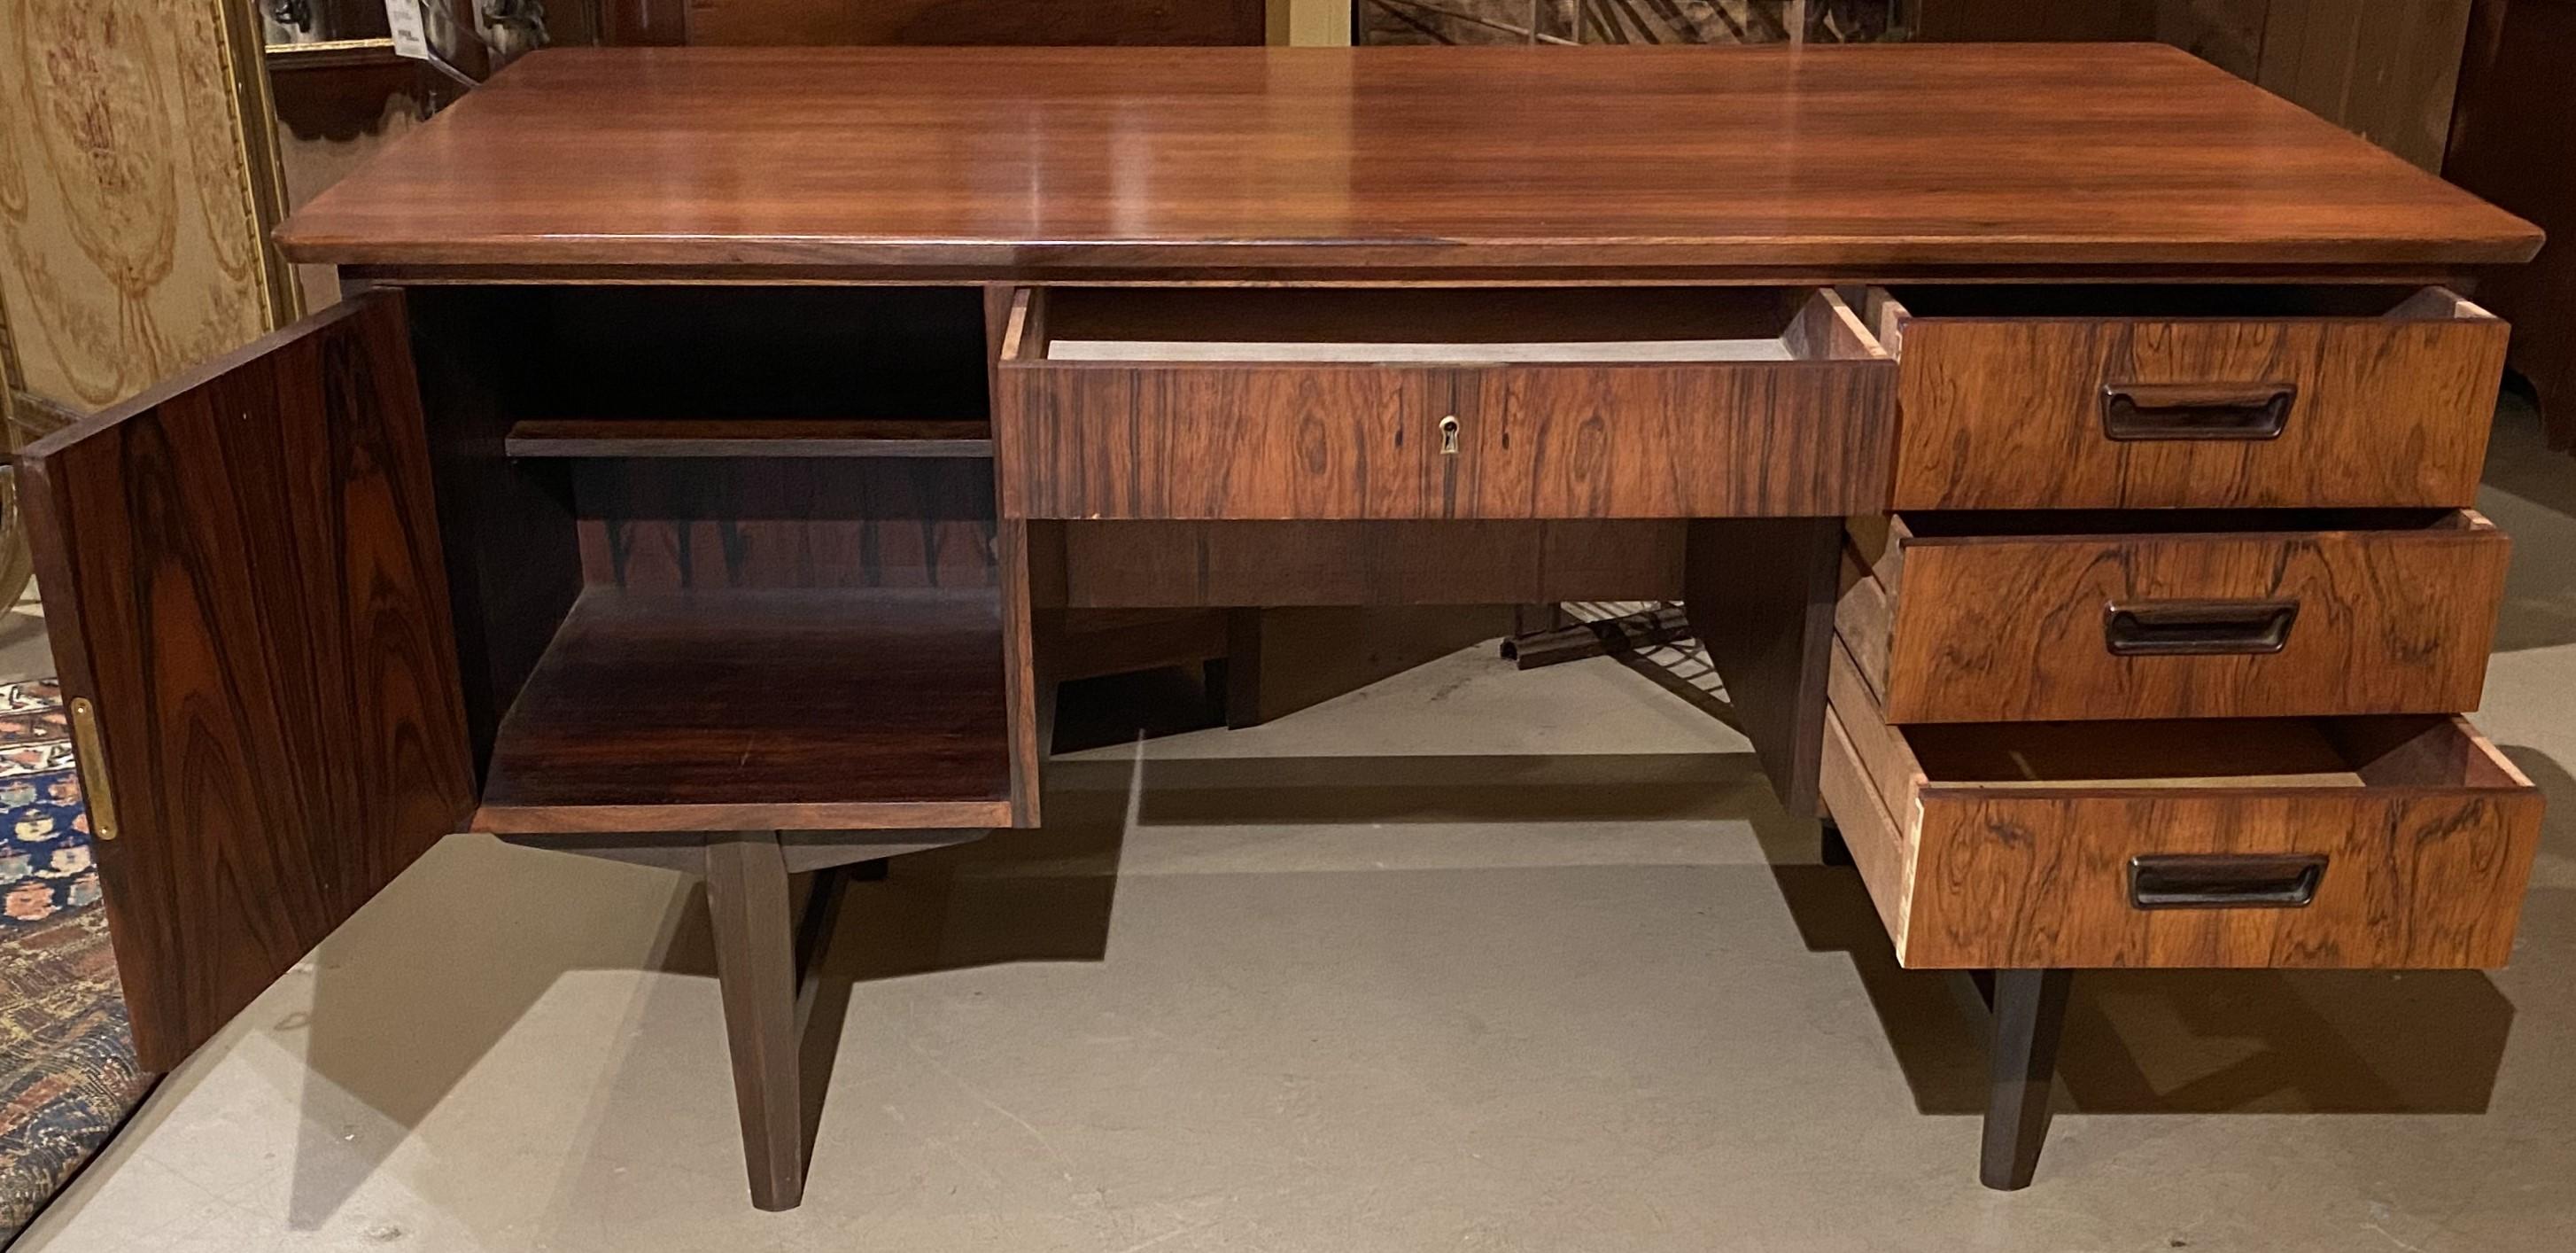 20th Century Rosewood Mid Century Modern Desk with Bookcase Front For Sale